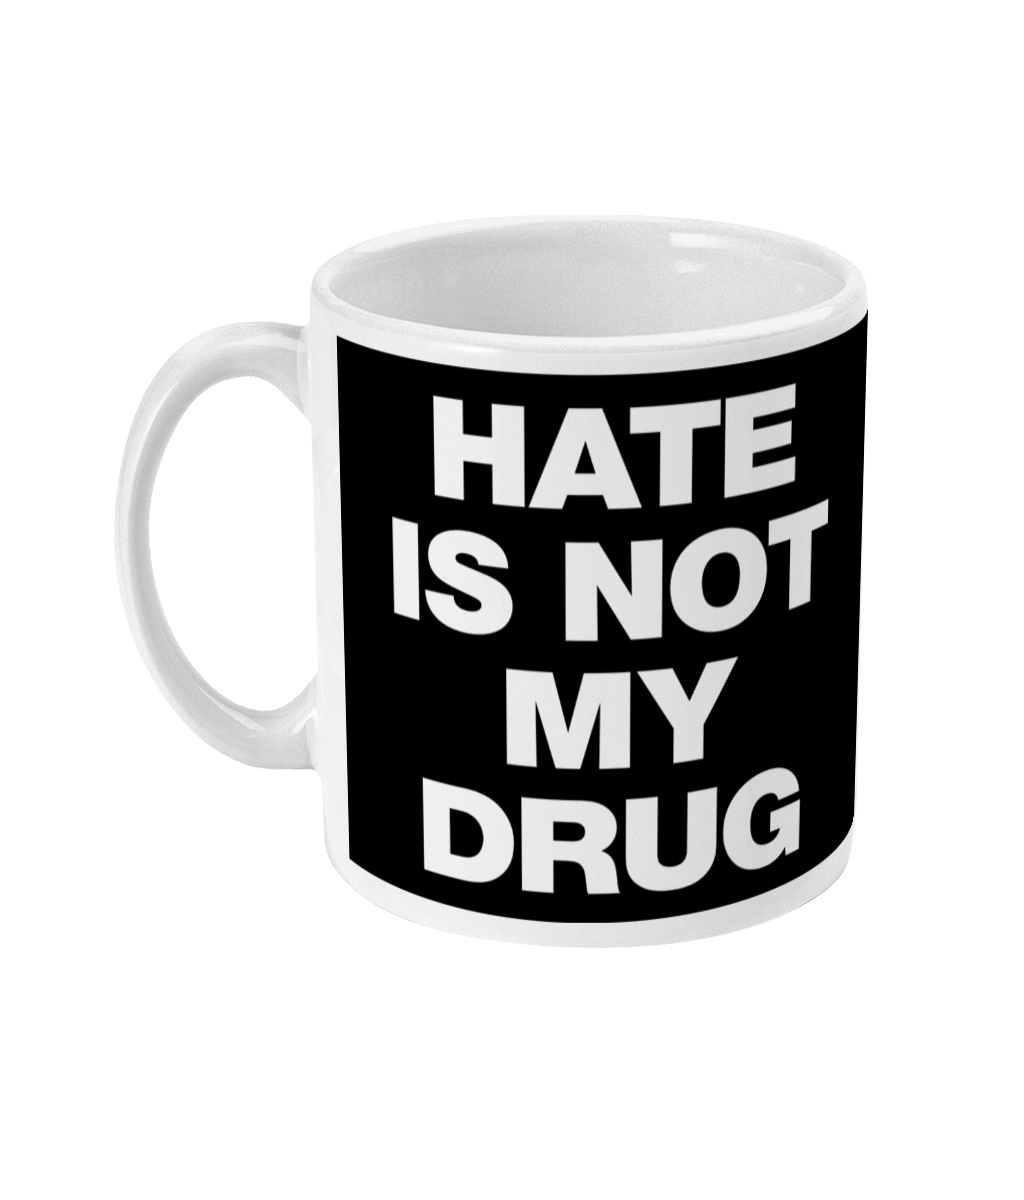 HATE IS NOT MY DRUG - White Text - Mug